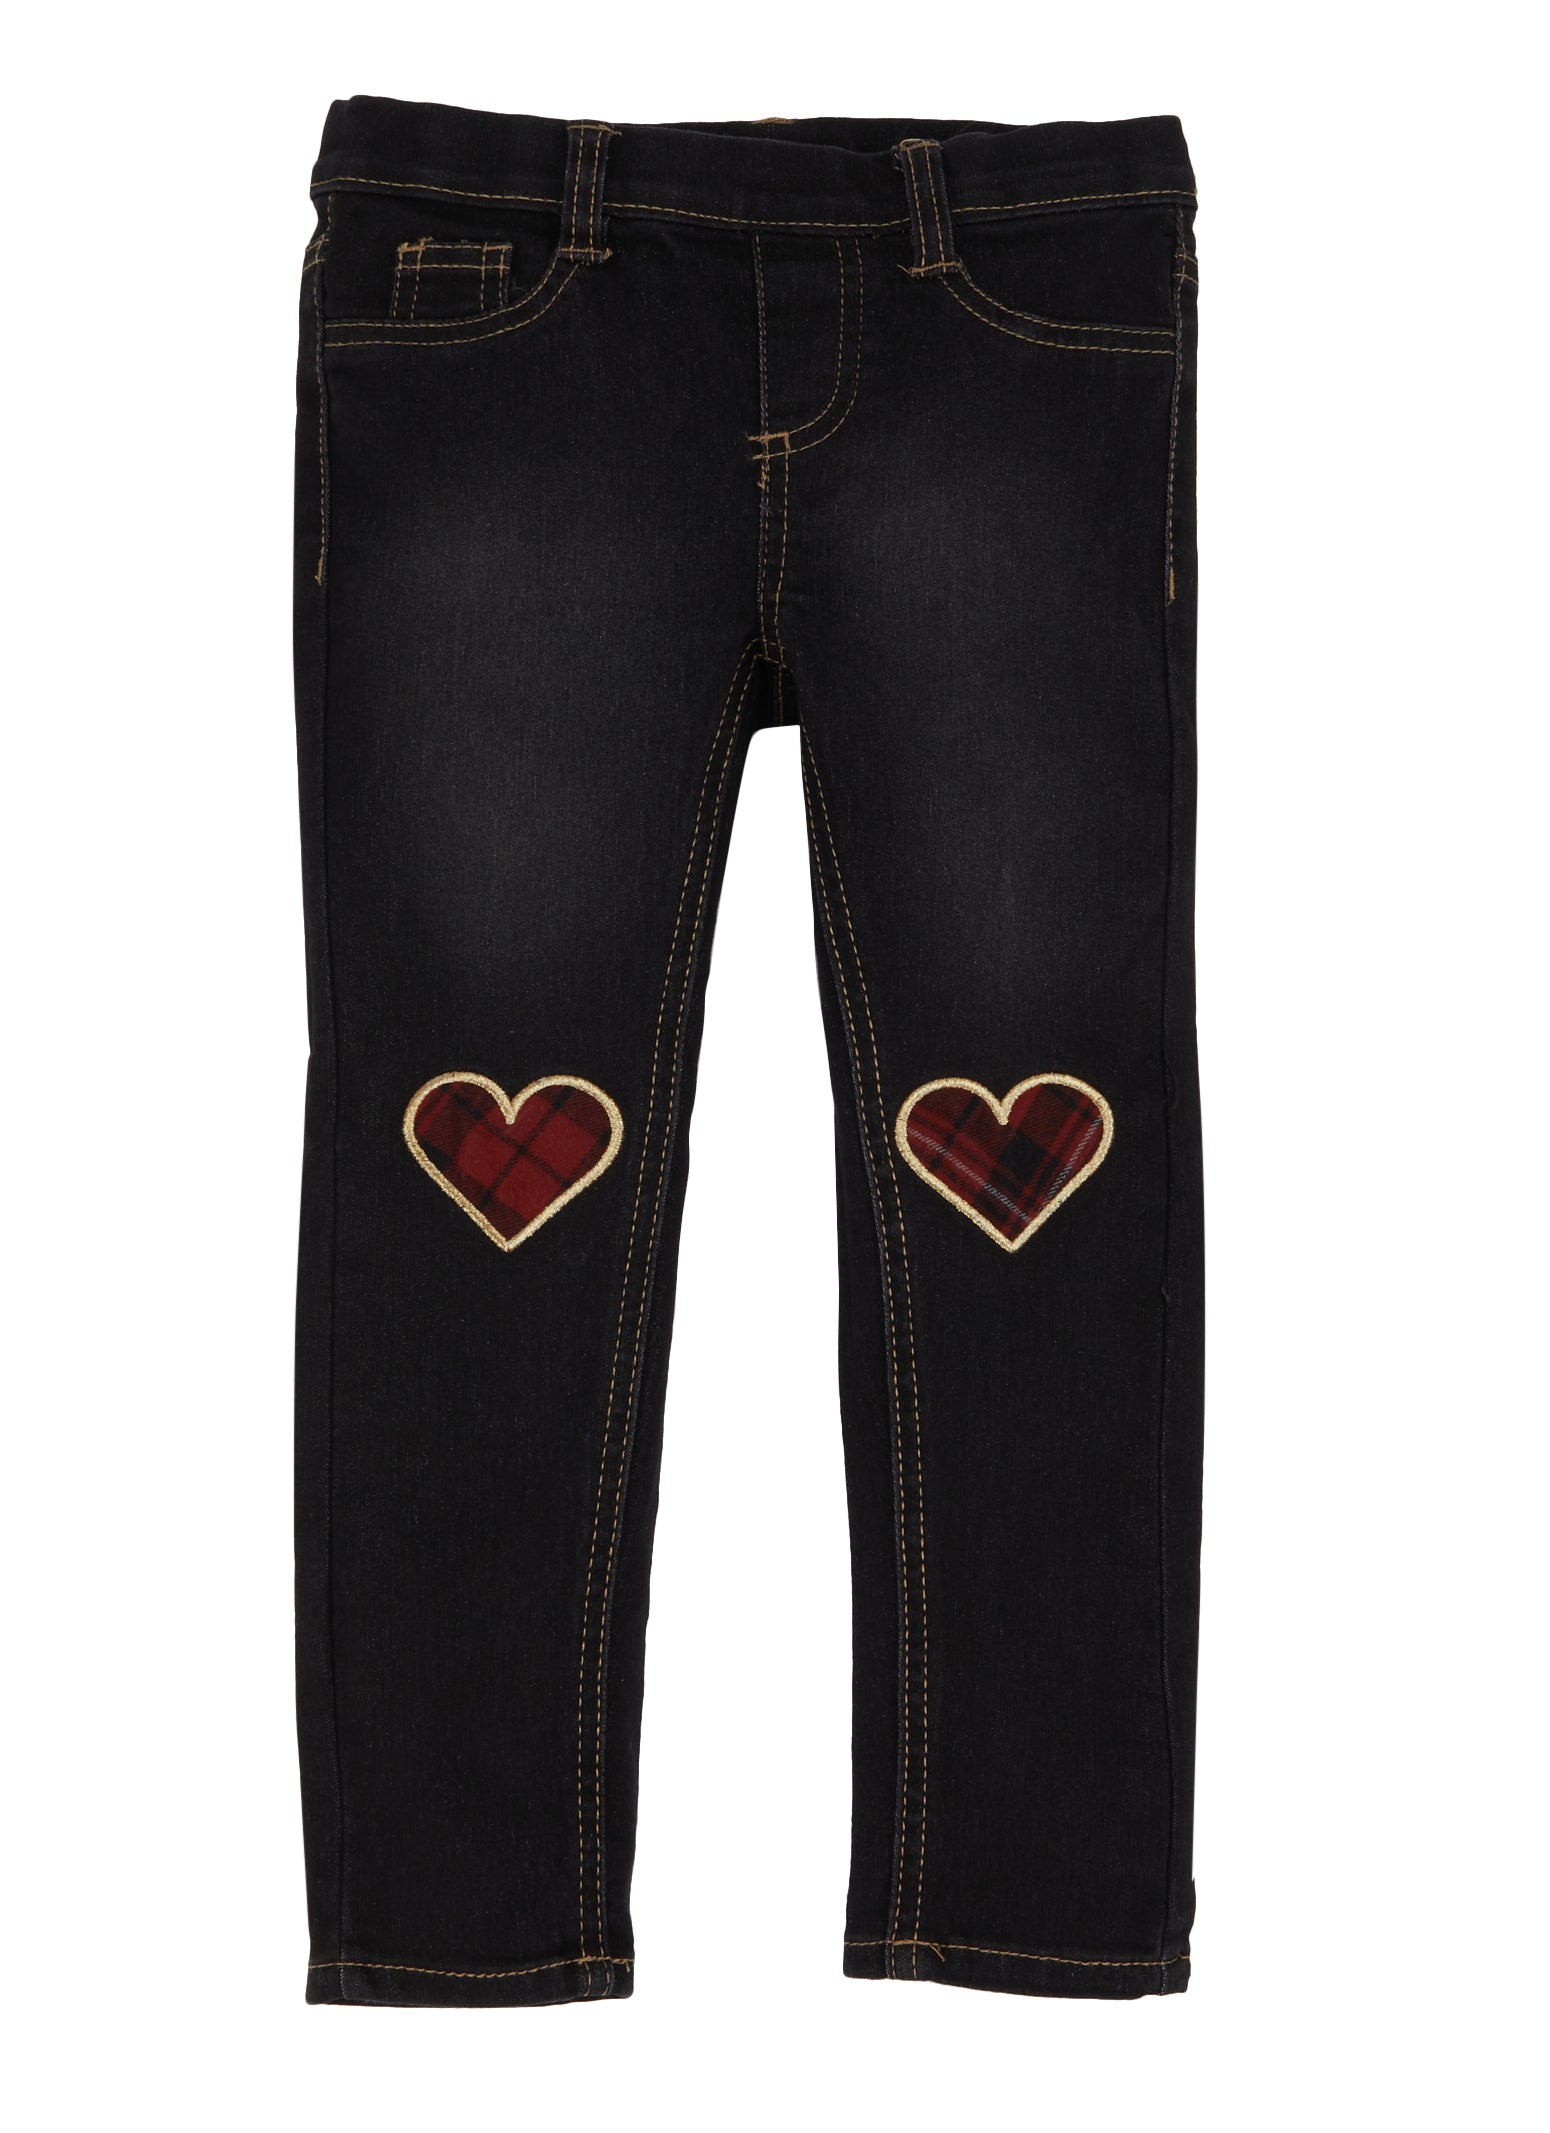 Girls Embroidered Plaid Heart Jeggings - Black